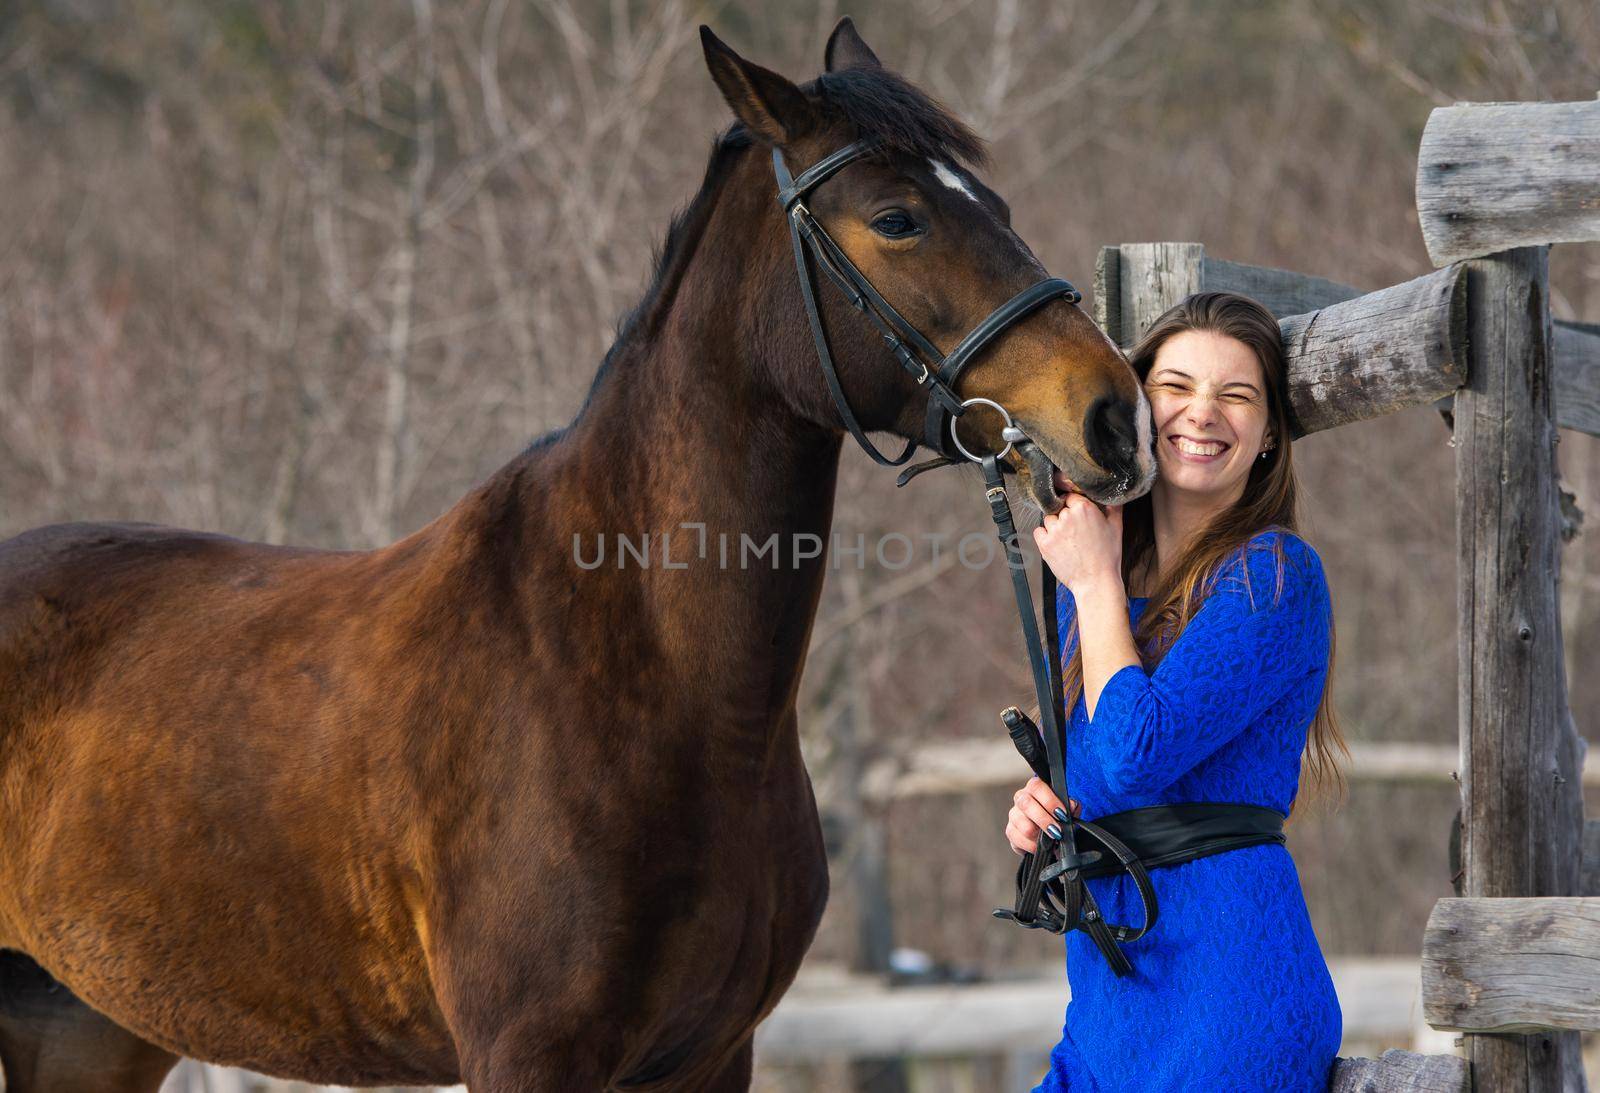 The horse caresses and bites the hand of a young beautiful girl a